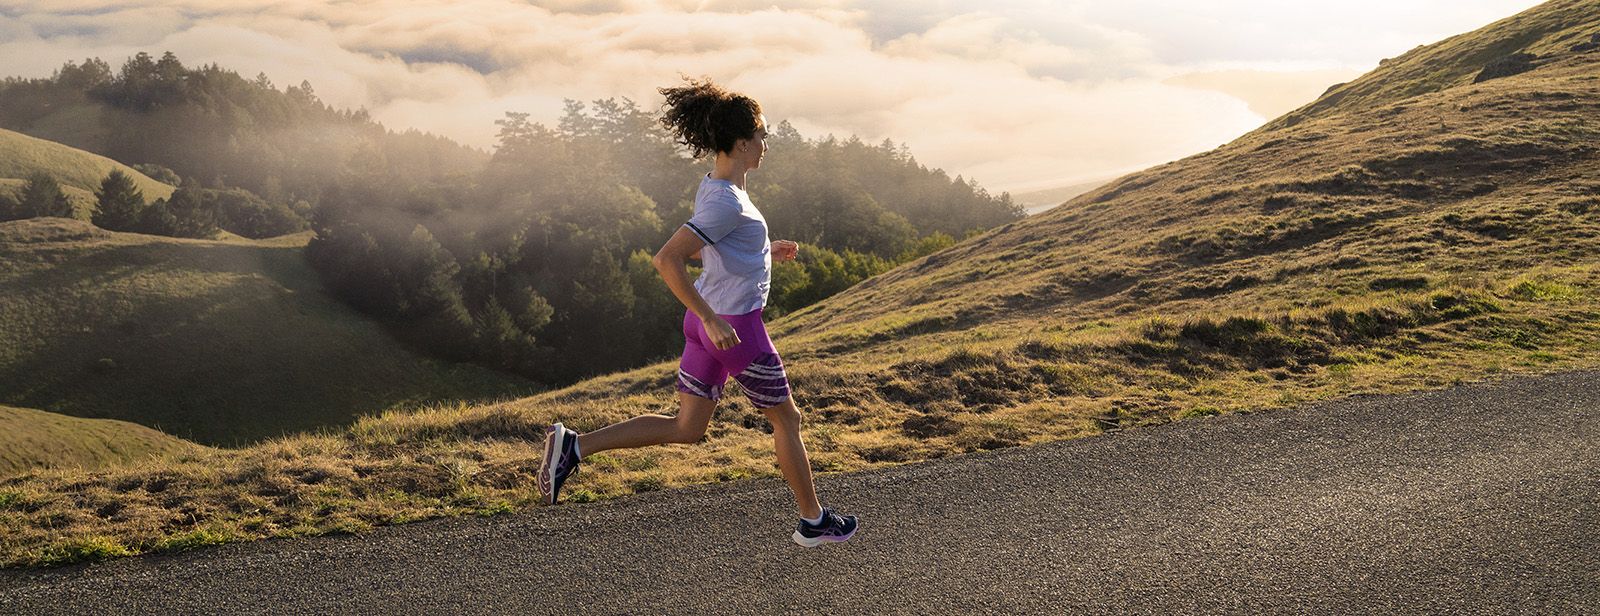 Woman running on mountain in ASICS clothing.